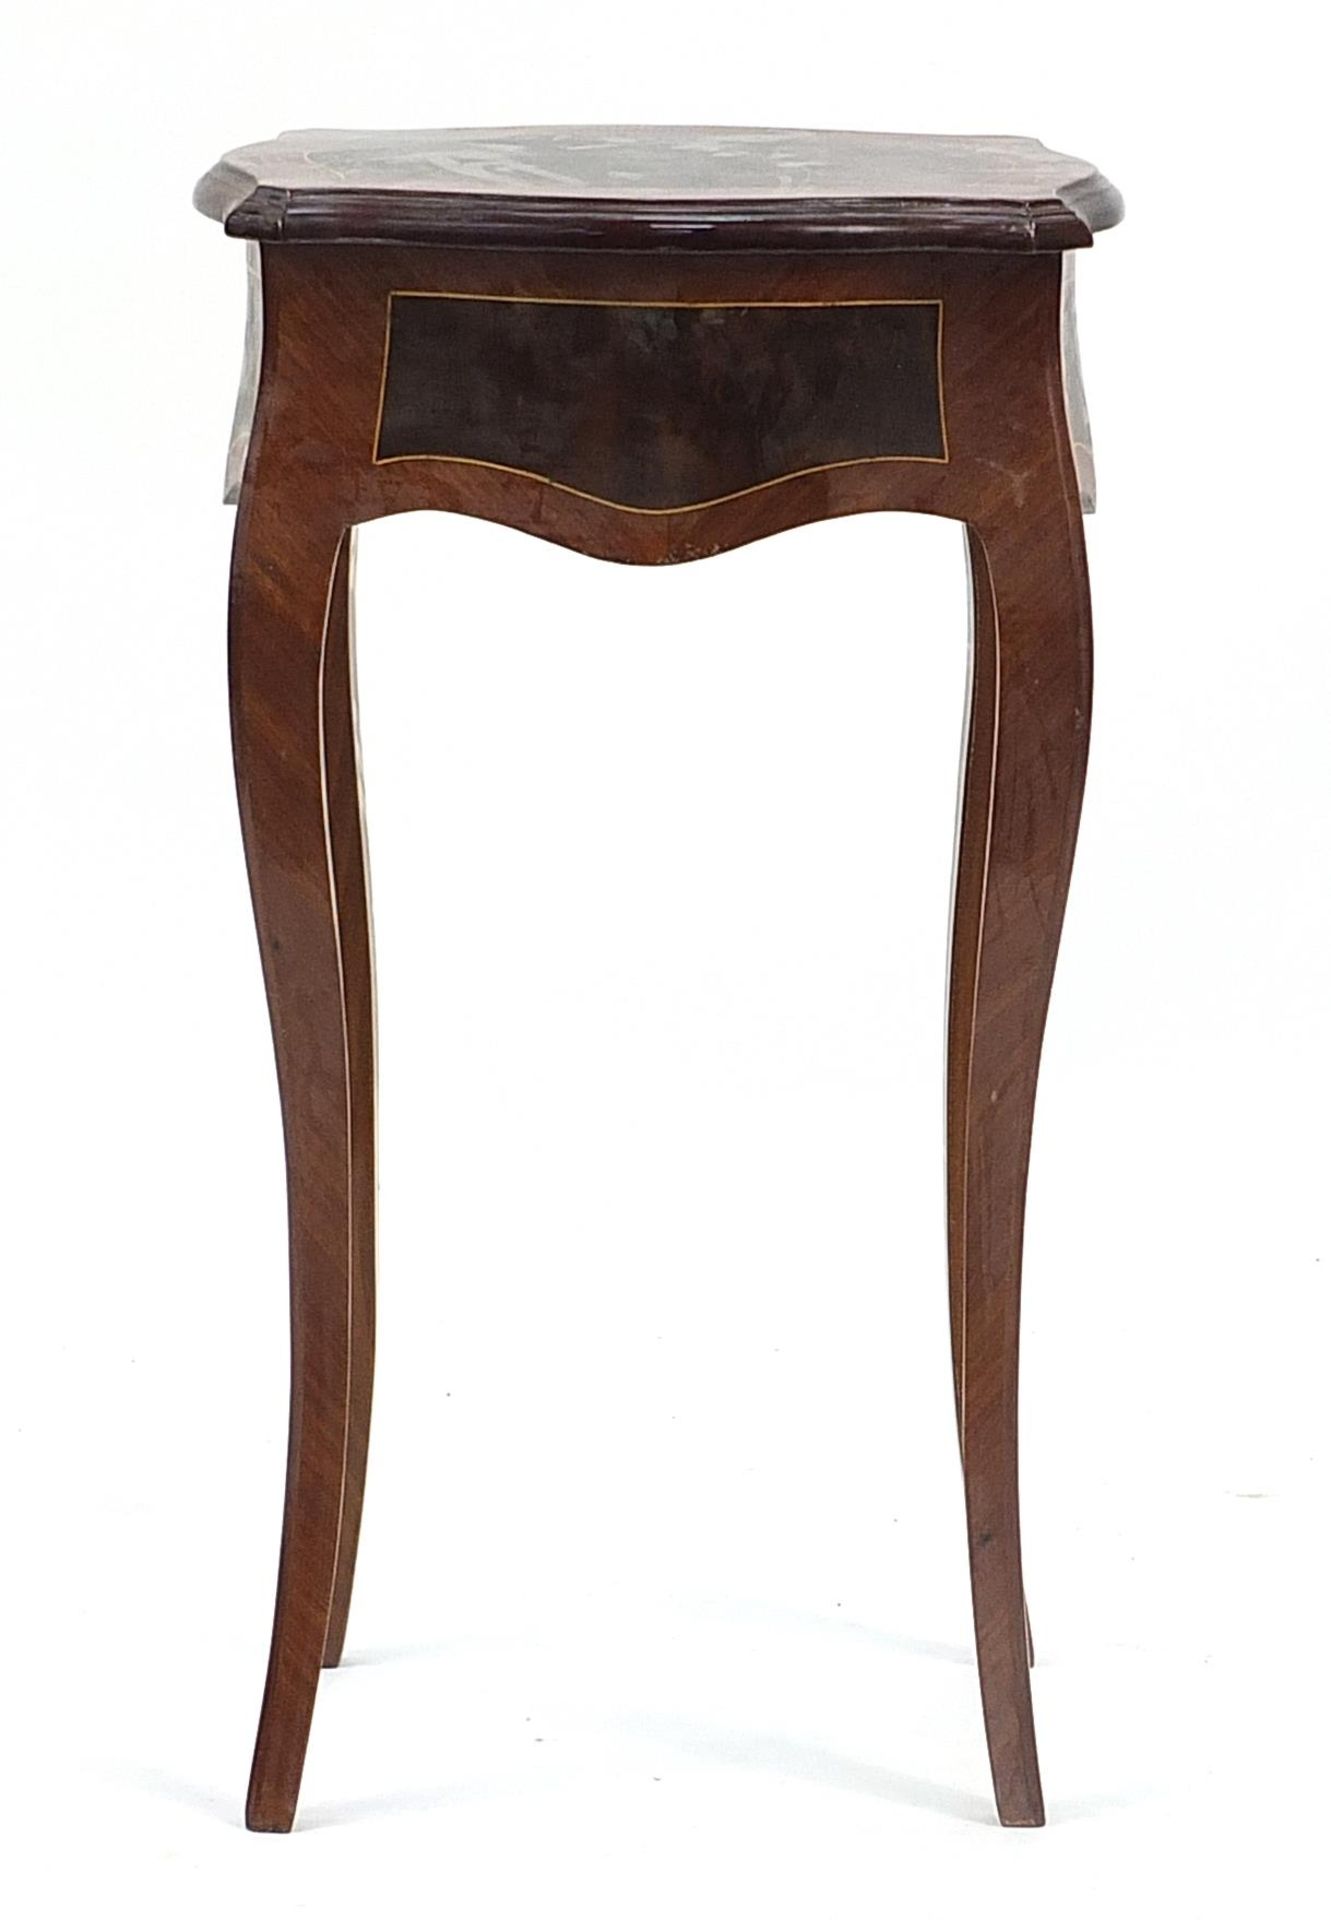 French style side table with serpentine outline and frieze drawer, 78cm H x 44cm W x 34cm D - Image 4 of 4